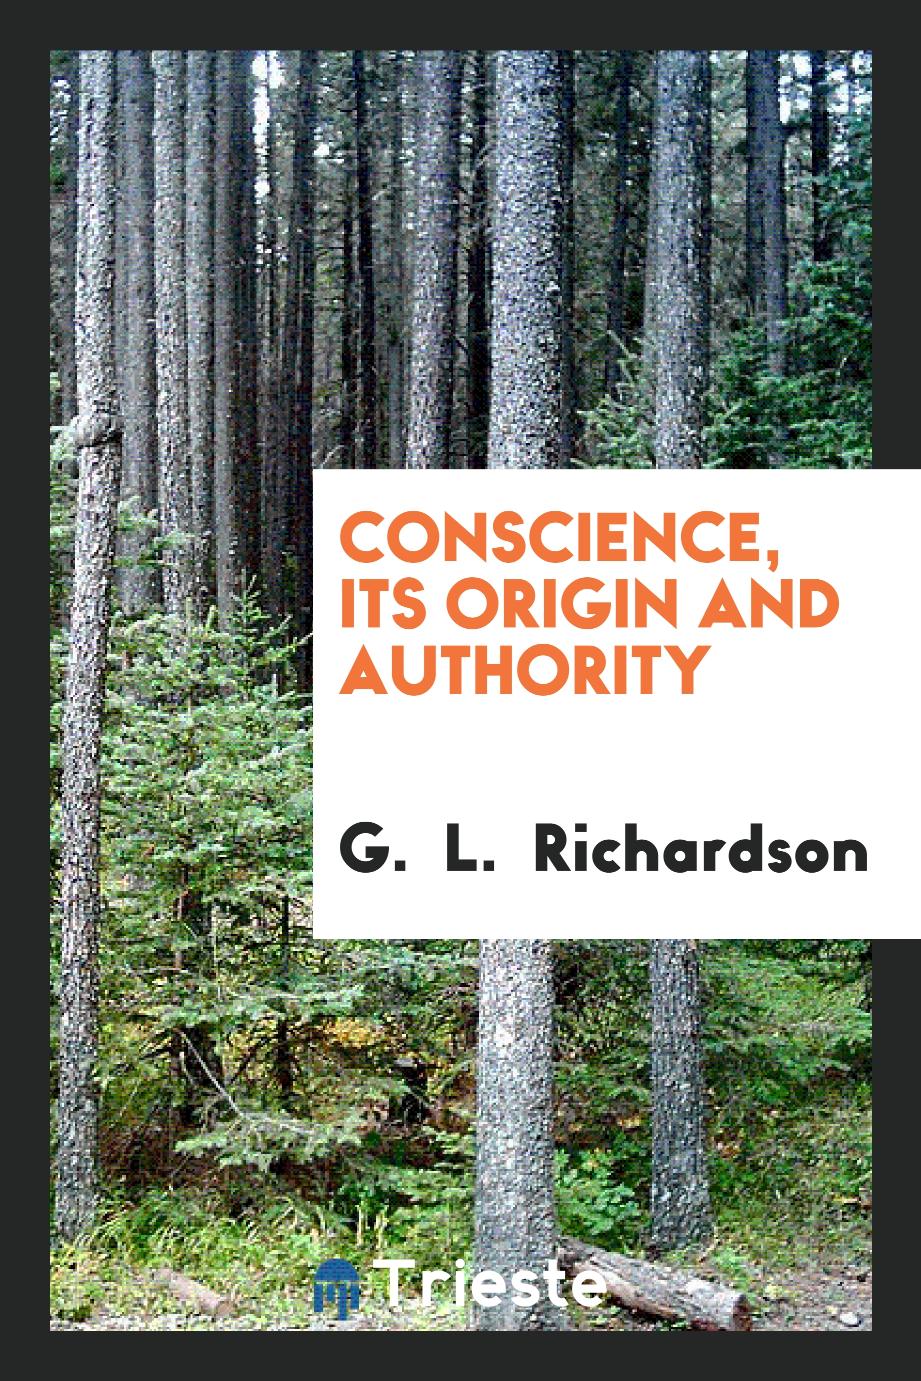 Conscience, its origin and authority